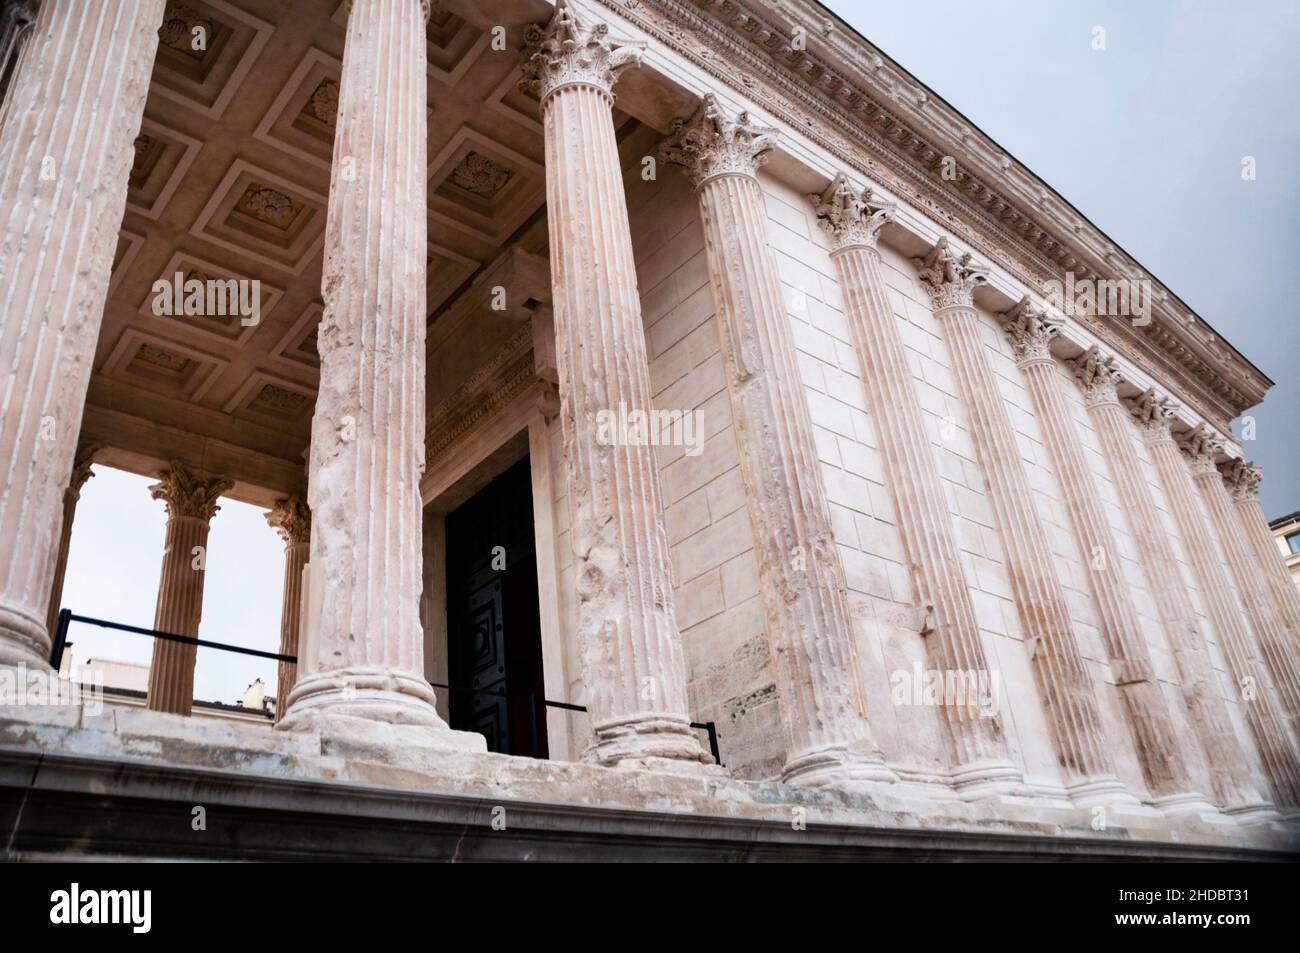 Embedded Corinthian columns of Maison Carrée Roman temple in Nîmes, France. Stock Photo